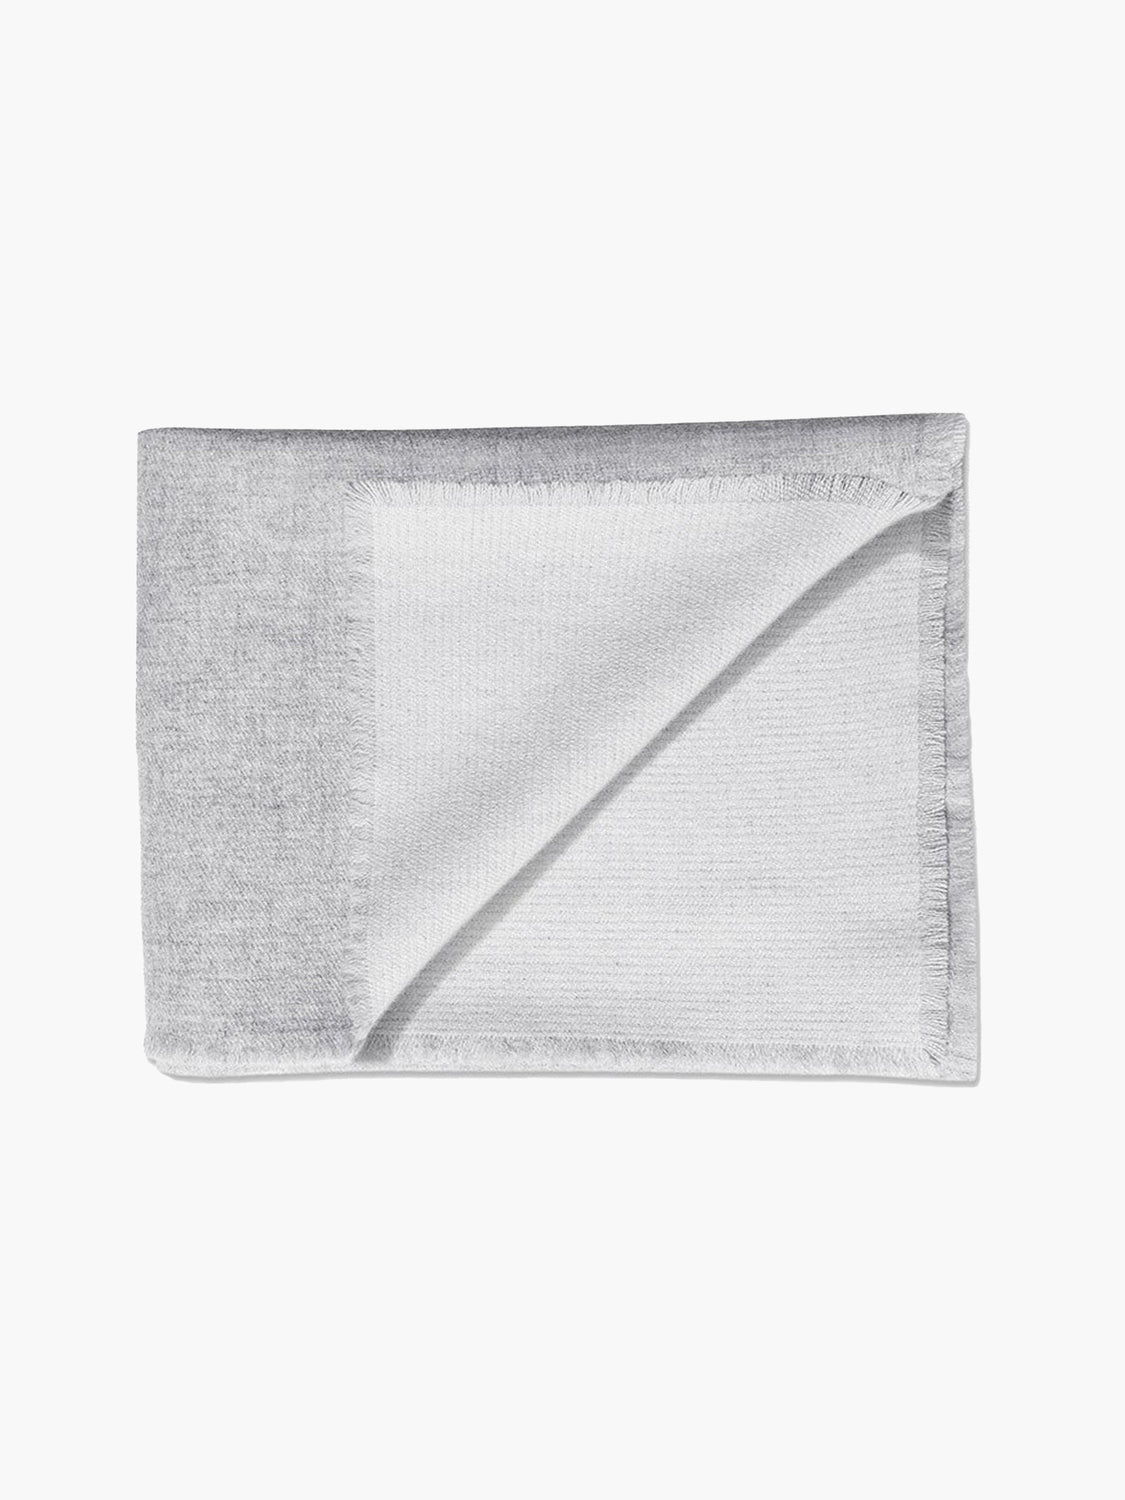 Double Sided Cashmere Throw - Grey / Ivory - color option